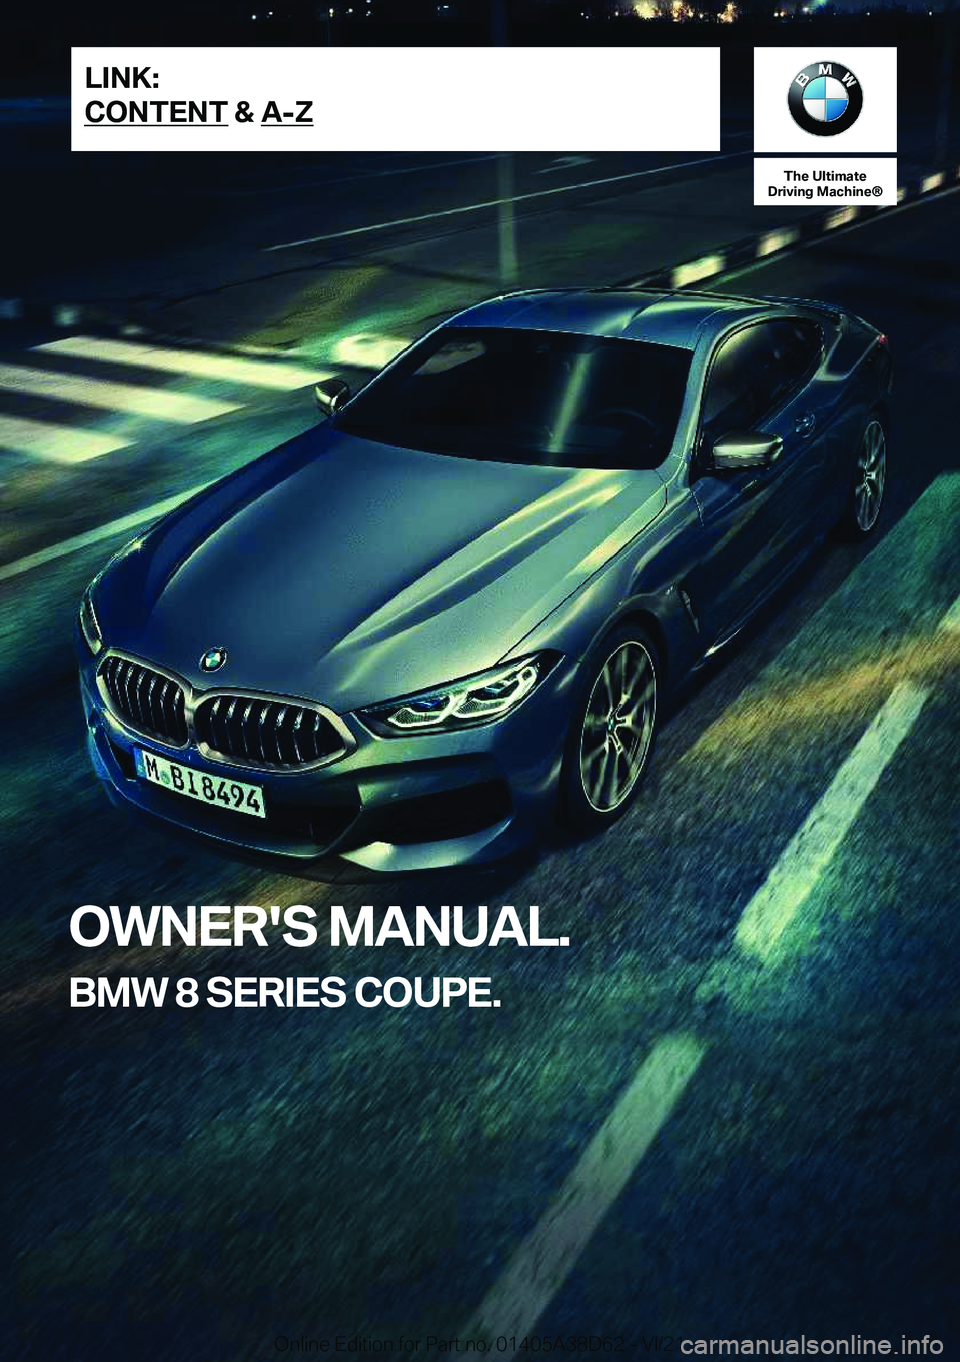 BMW 8 SERIES 2022  Owners Manual �T�h�e��U�l�t�i�m�a�t�e
�D�r�i�v�i�n�g��M�a�c�h�i�n�e�n
�O�W�N�E�R�'�S��M�A�N�U�A�L�.
�B�M�W��8��S�E�R�I�E�S��C�O�U�P�E�.�L�I�N�K�:
�C�O�N�T�E�N�T��&��A�-�Z�O�n�l�i�n�e��E�d�i�t�i�o�n��f